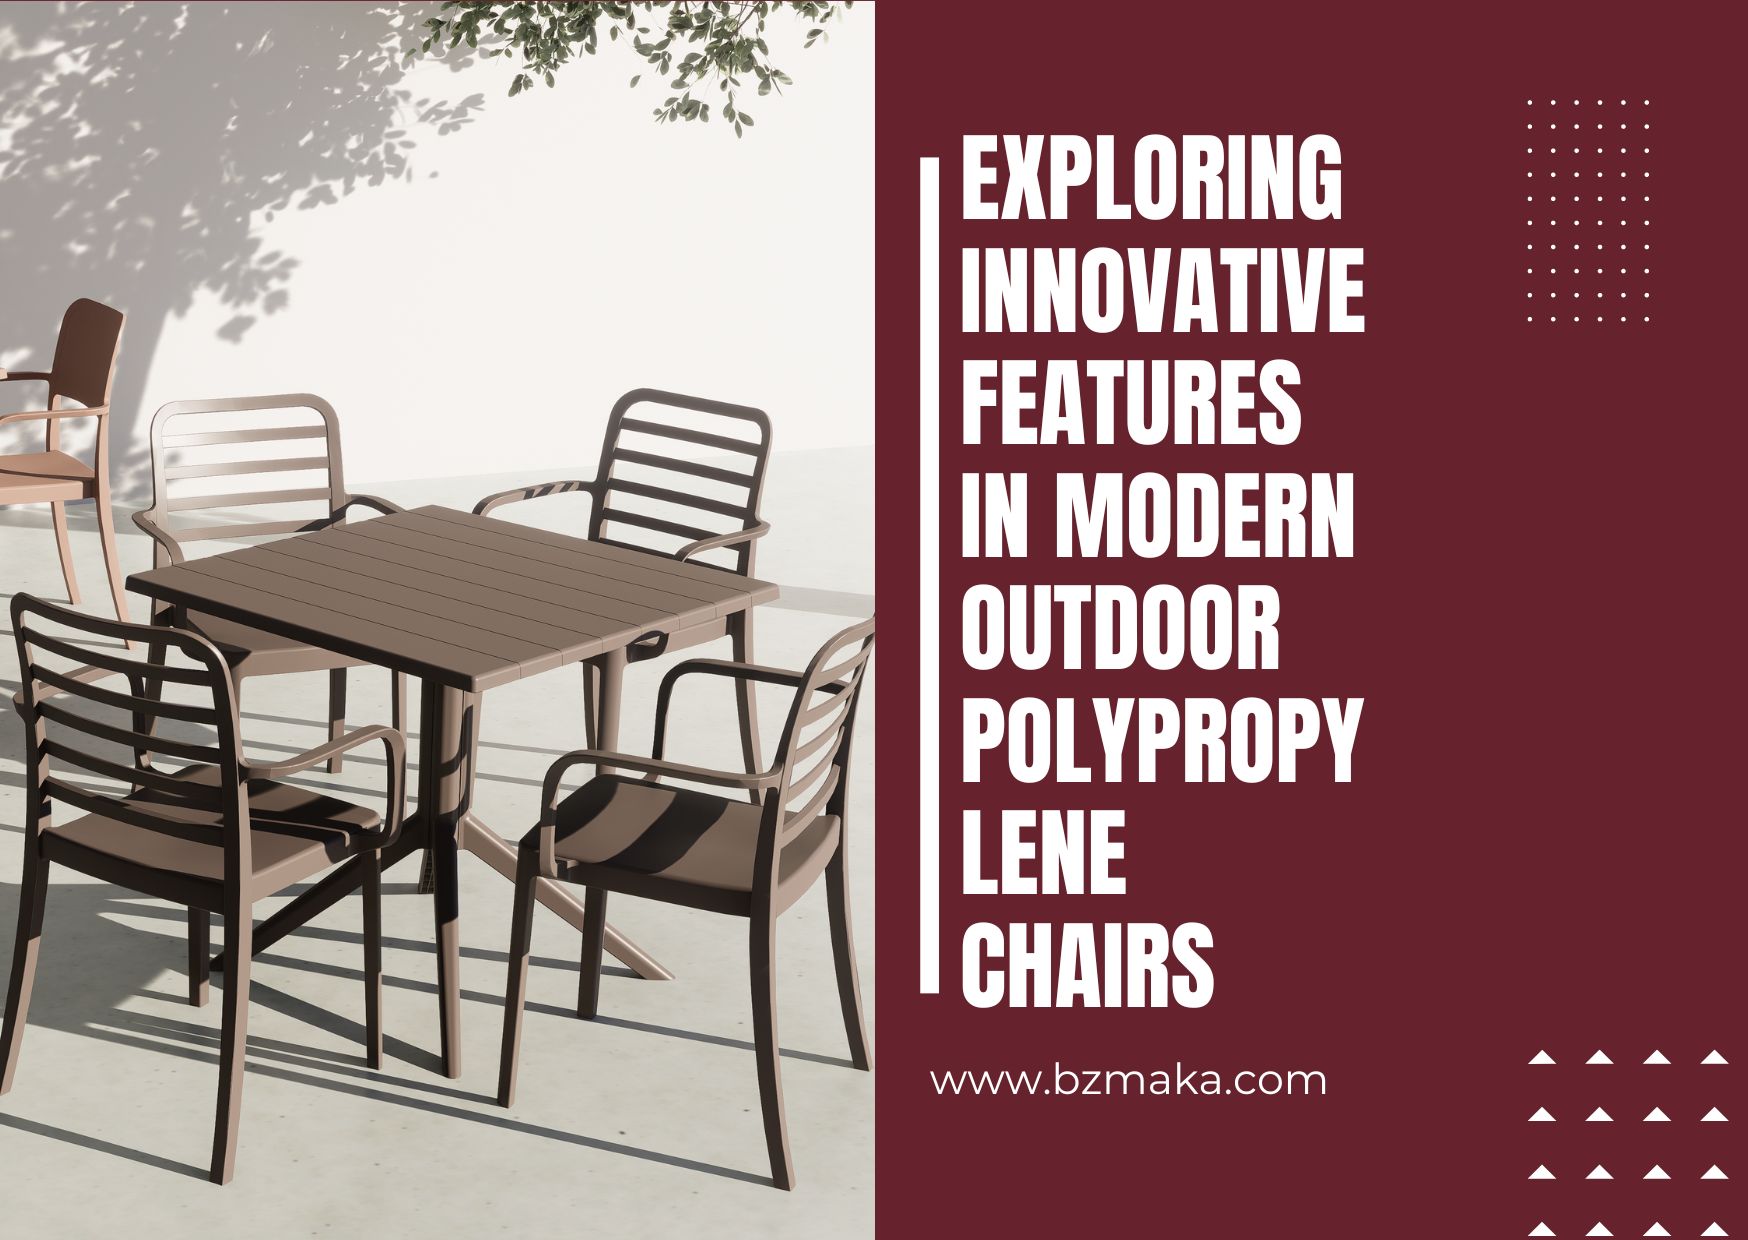 Exploring Innovative Features in Modern Outdoor Polypropylene Chairs